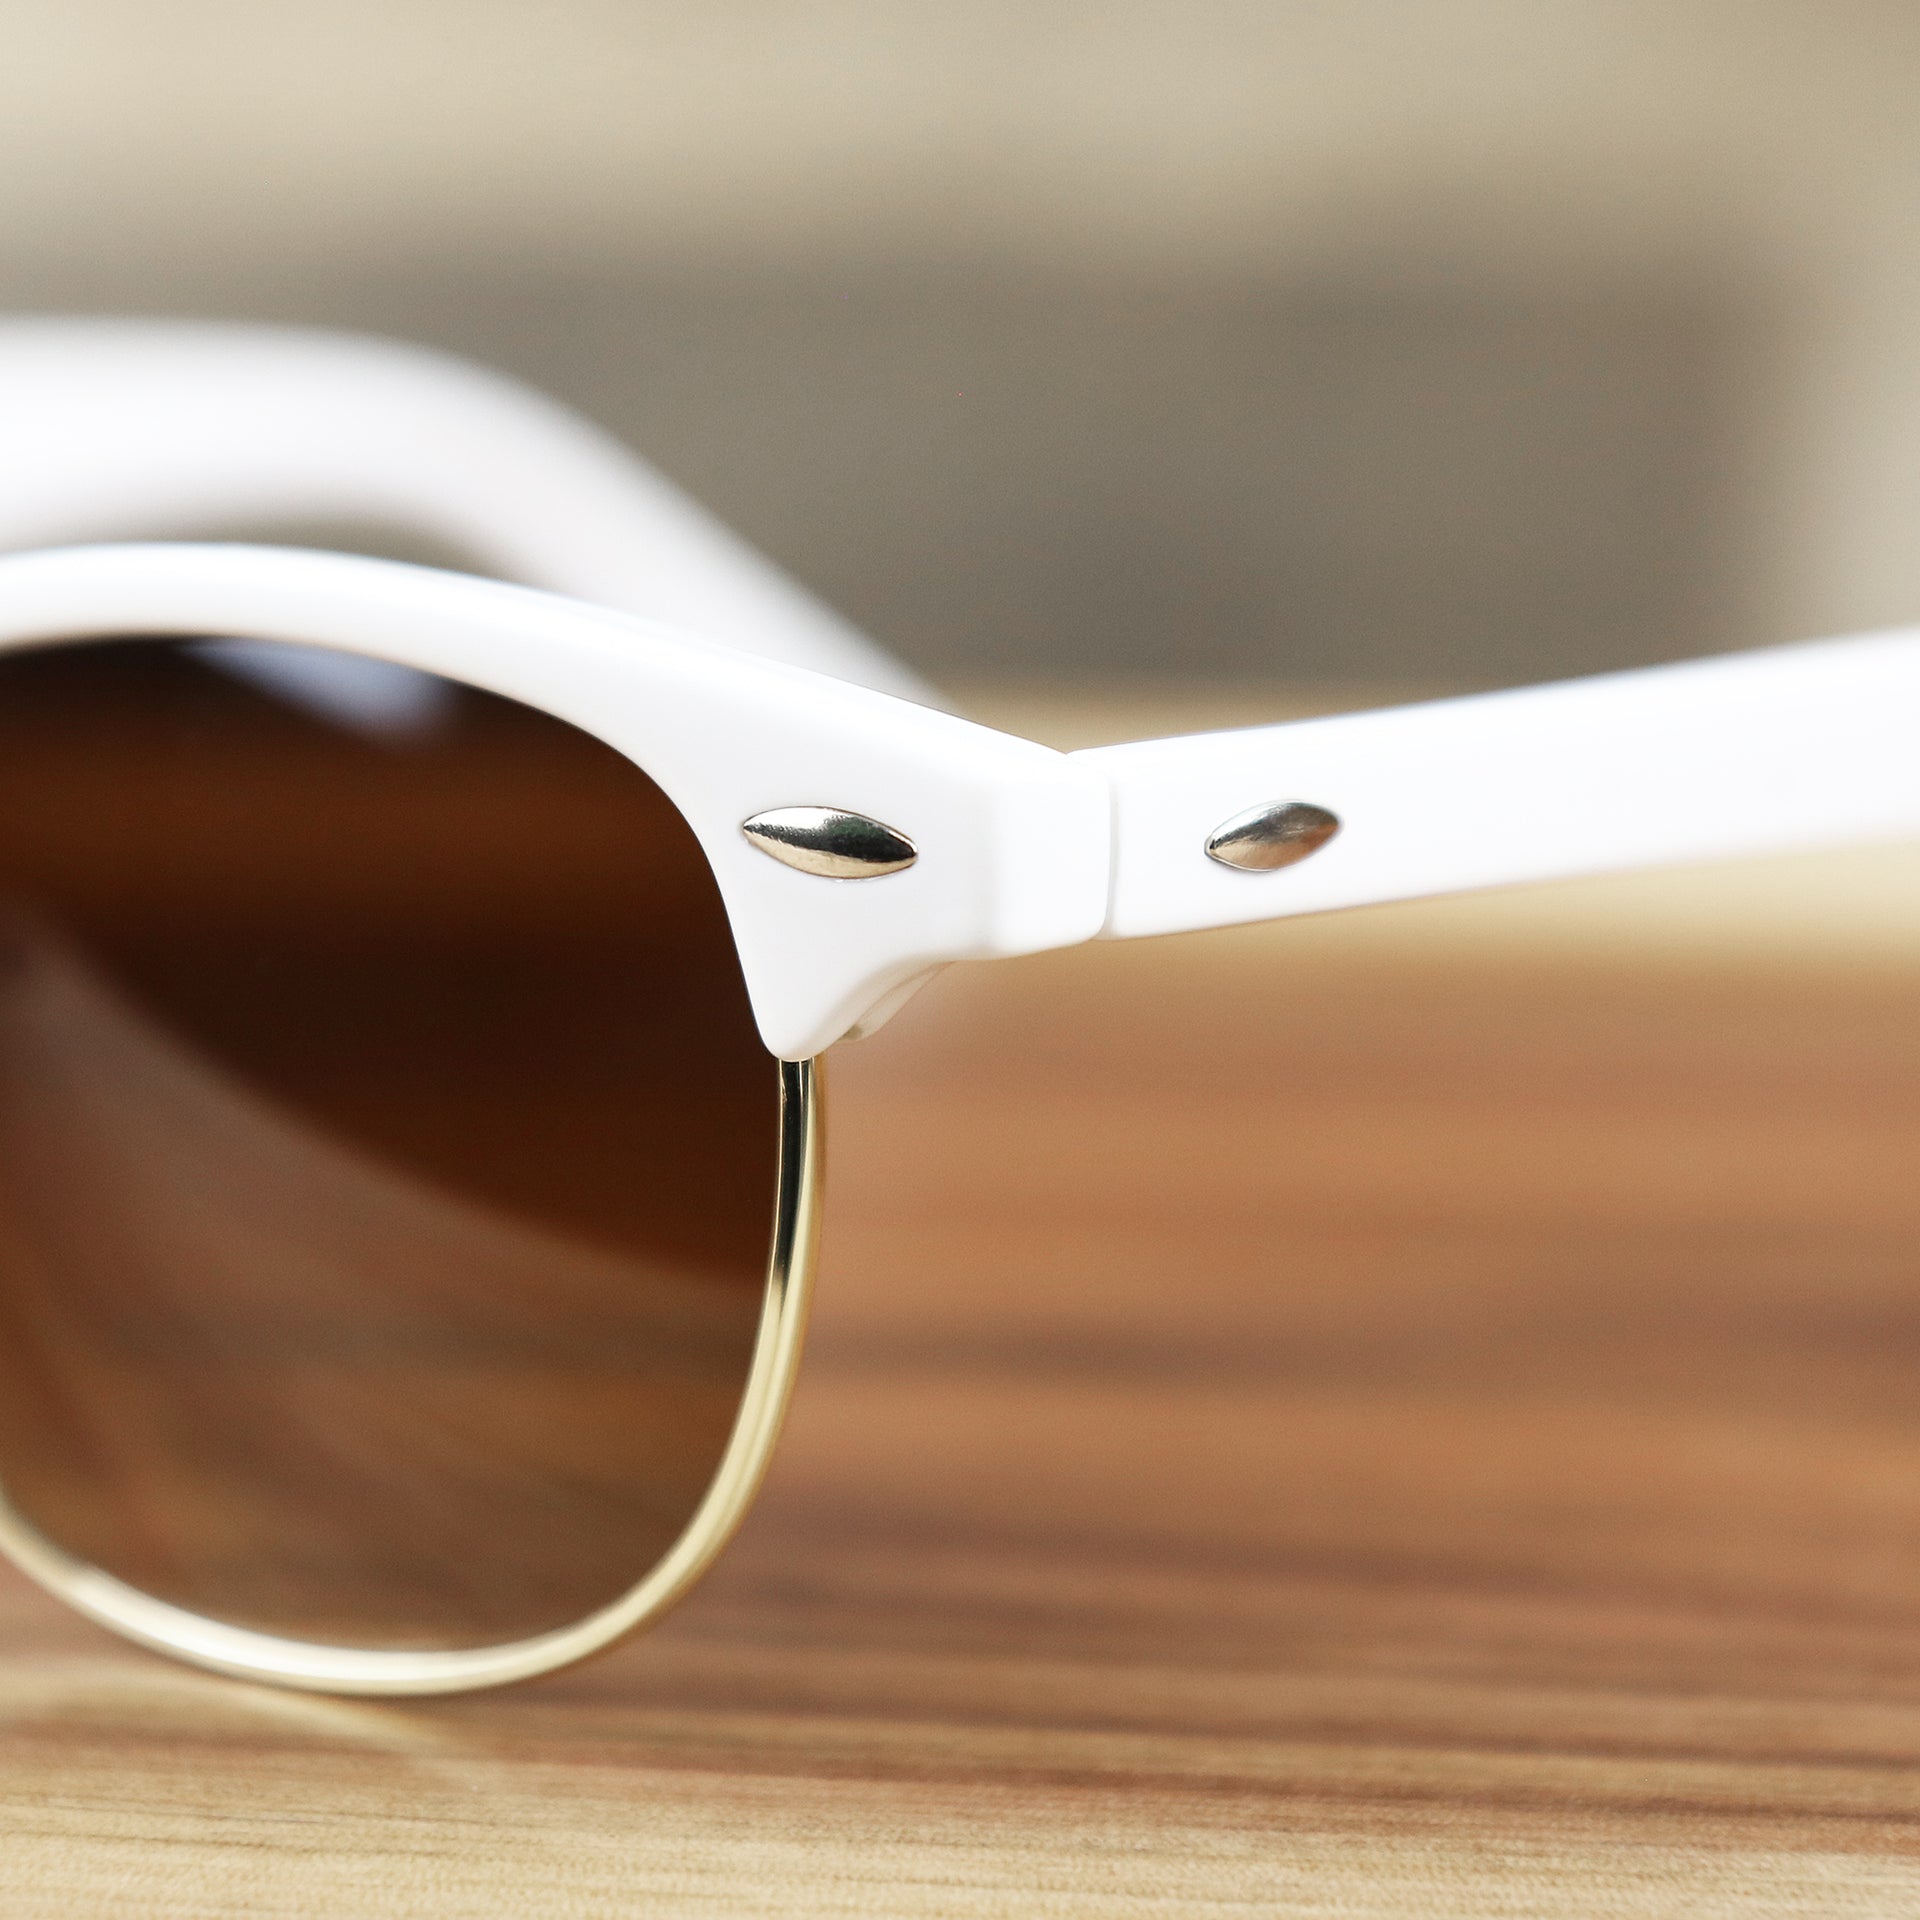 The hinge on the Round Frame Brown Gradient Lens Sunglasses with White Gold Frame